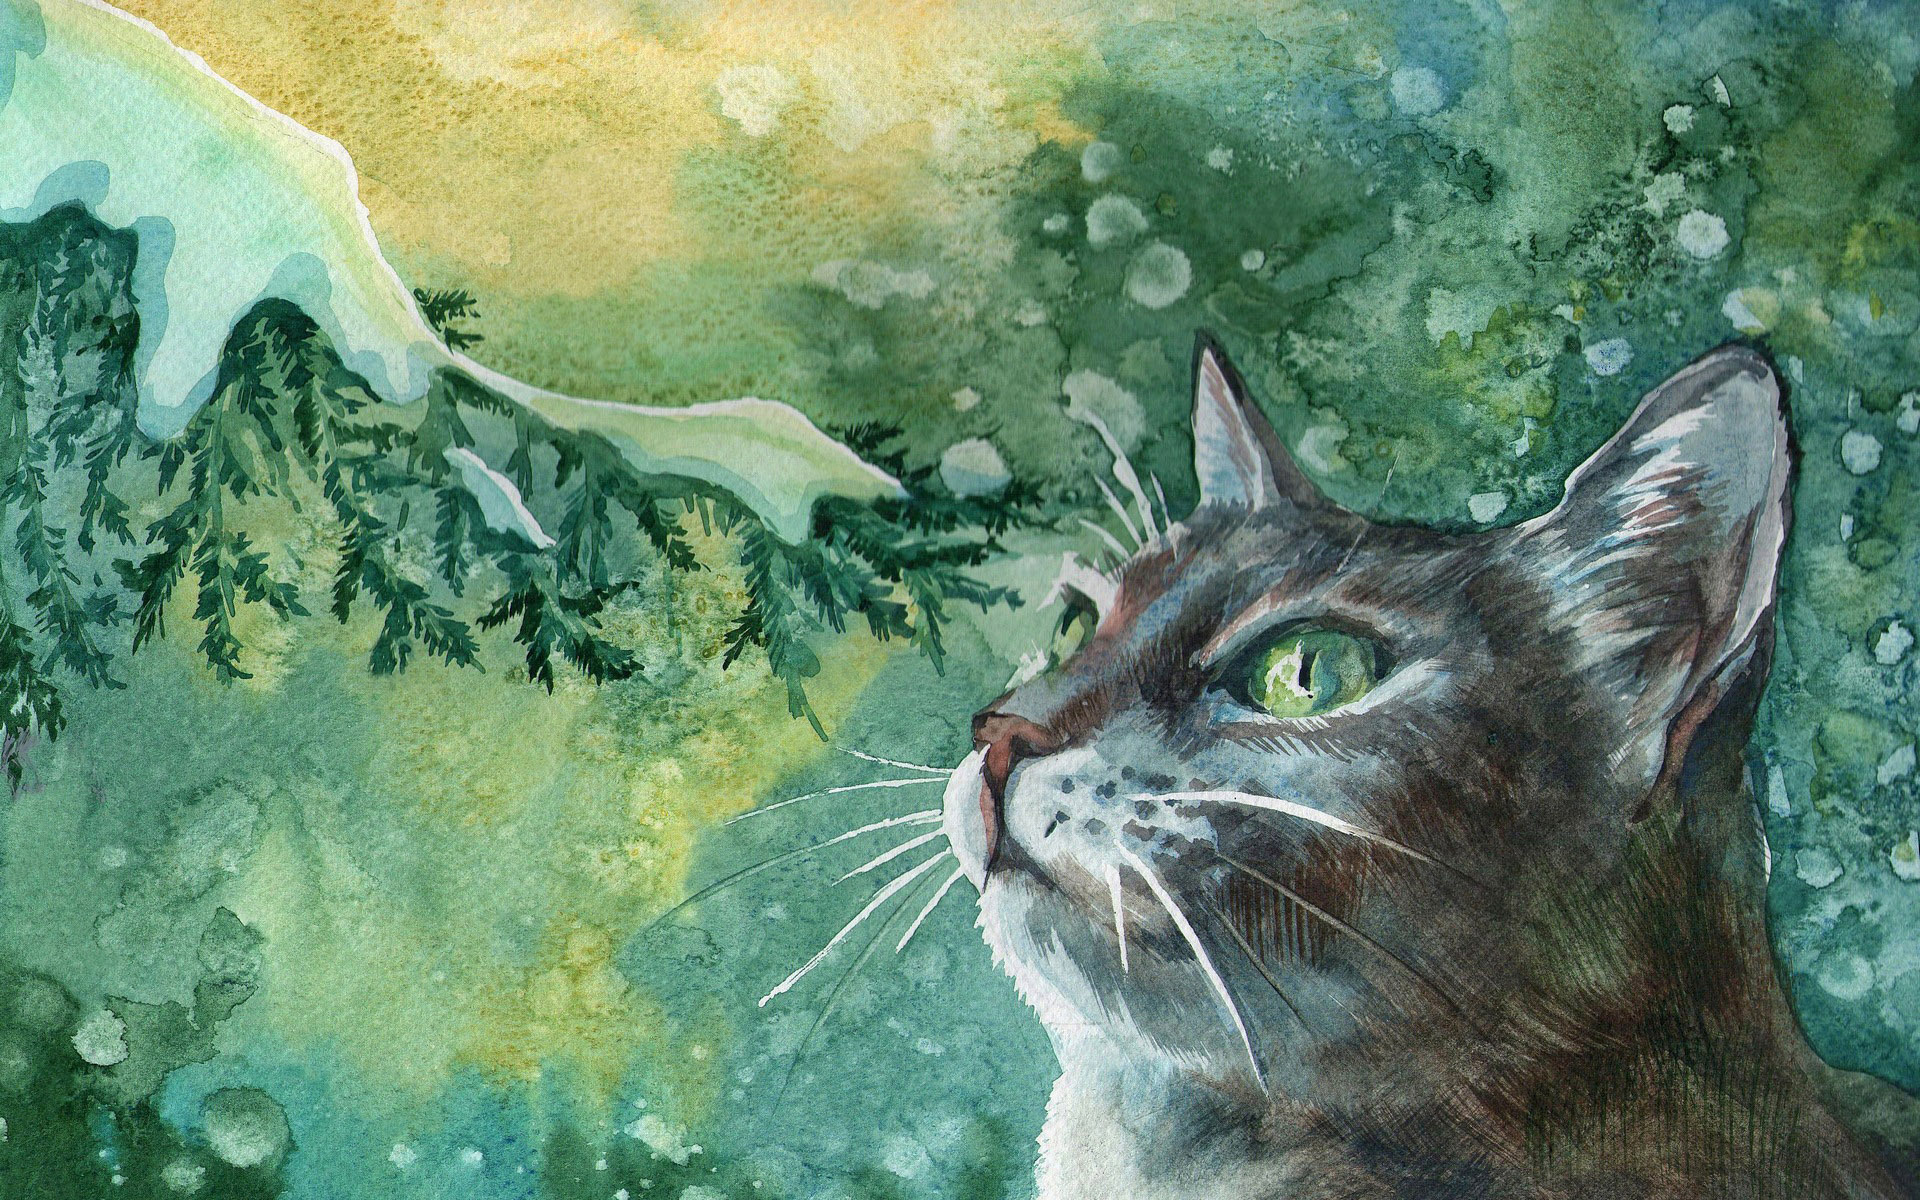 art, Painting, Winter, Cat, Tomcat, Green, Eyes, Mustache, Branch, Tree, Snow, Snowflakes, Miracle Wallpaper